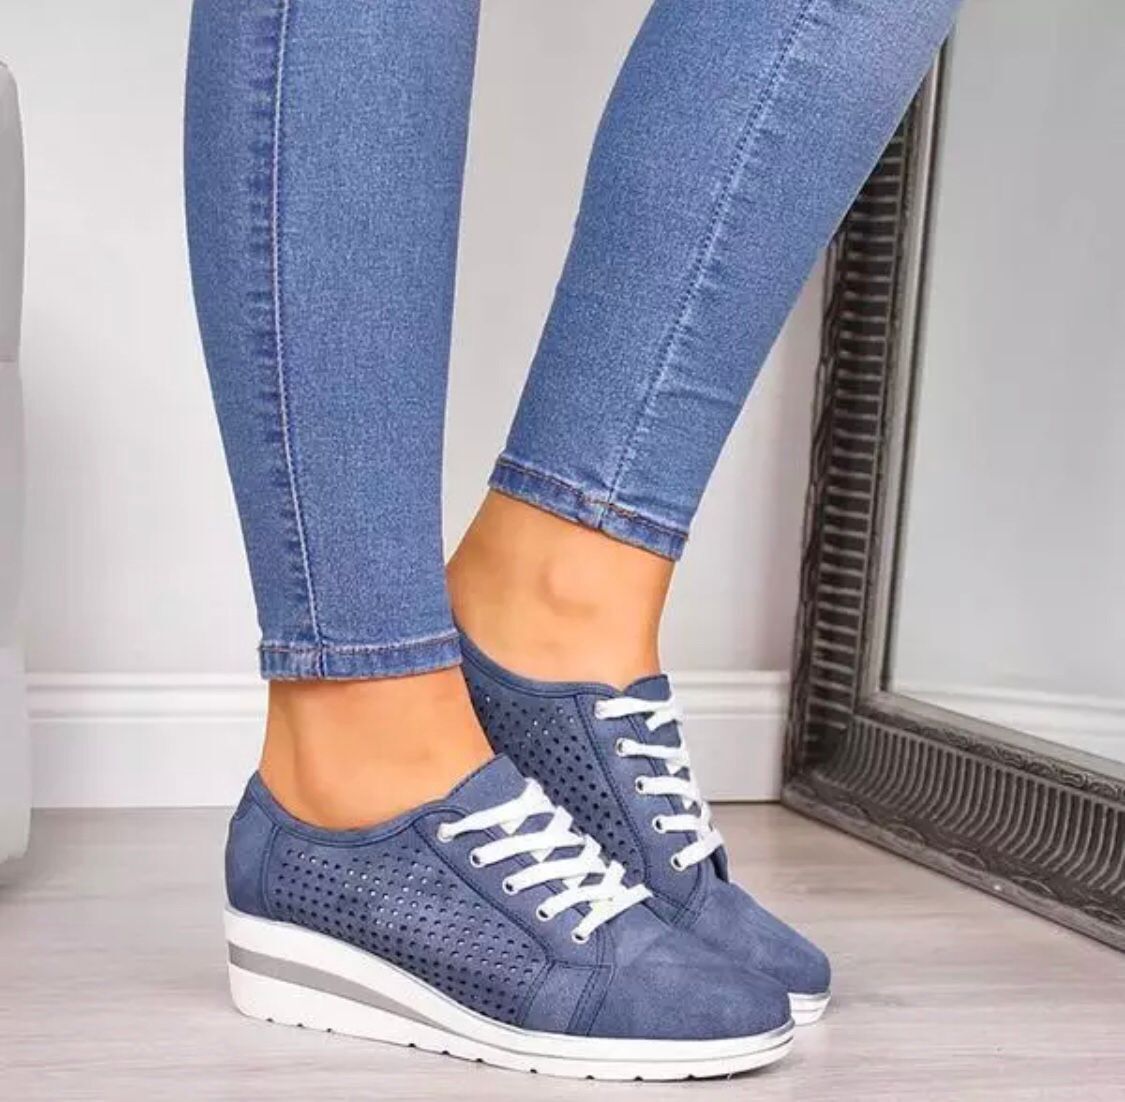 Comfortable wedge openwork breathable lace-up casual sneakers - fits